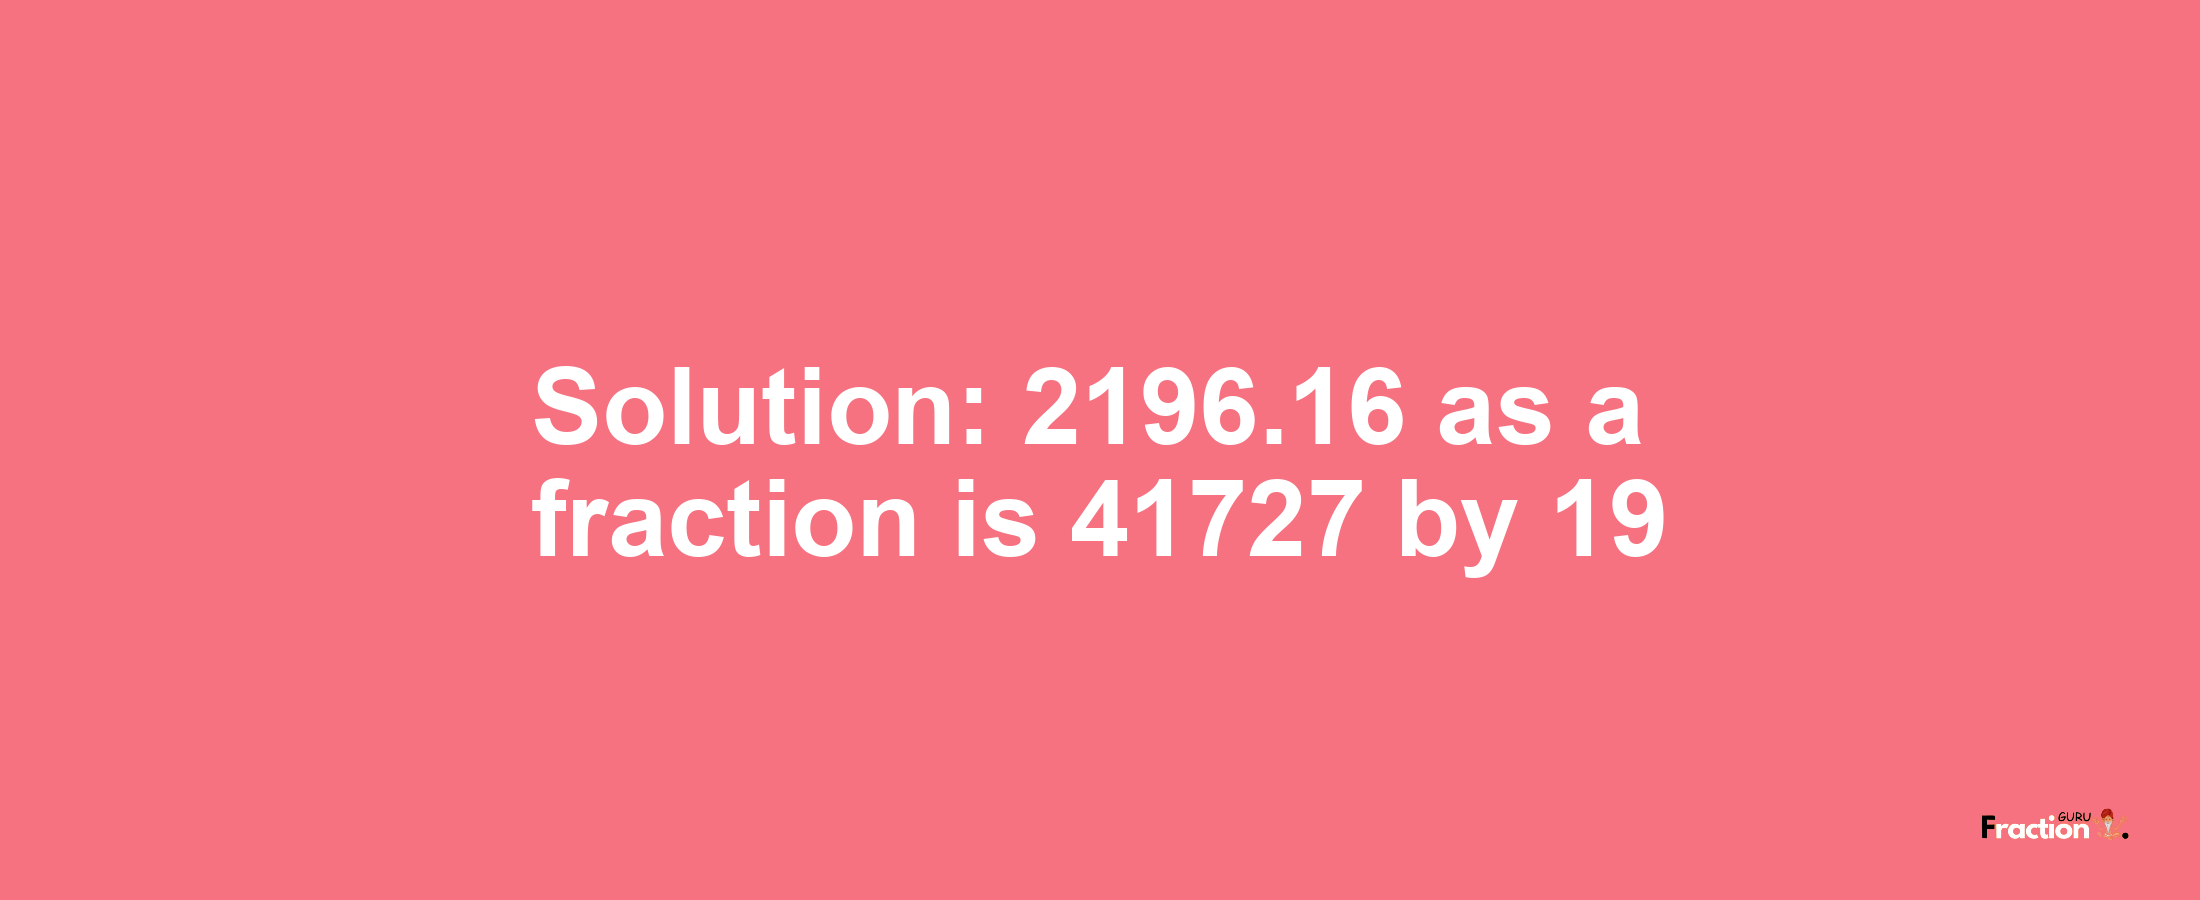 Solution:2196.16 as a fraction is 41727/19